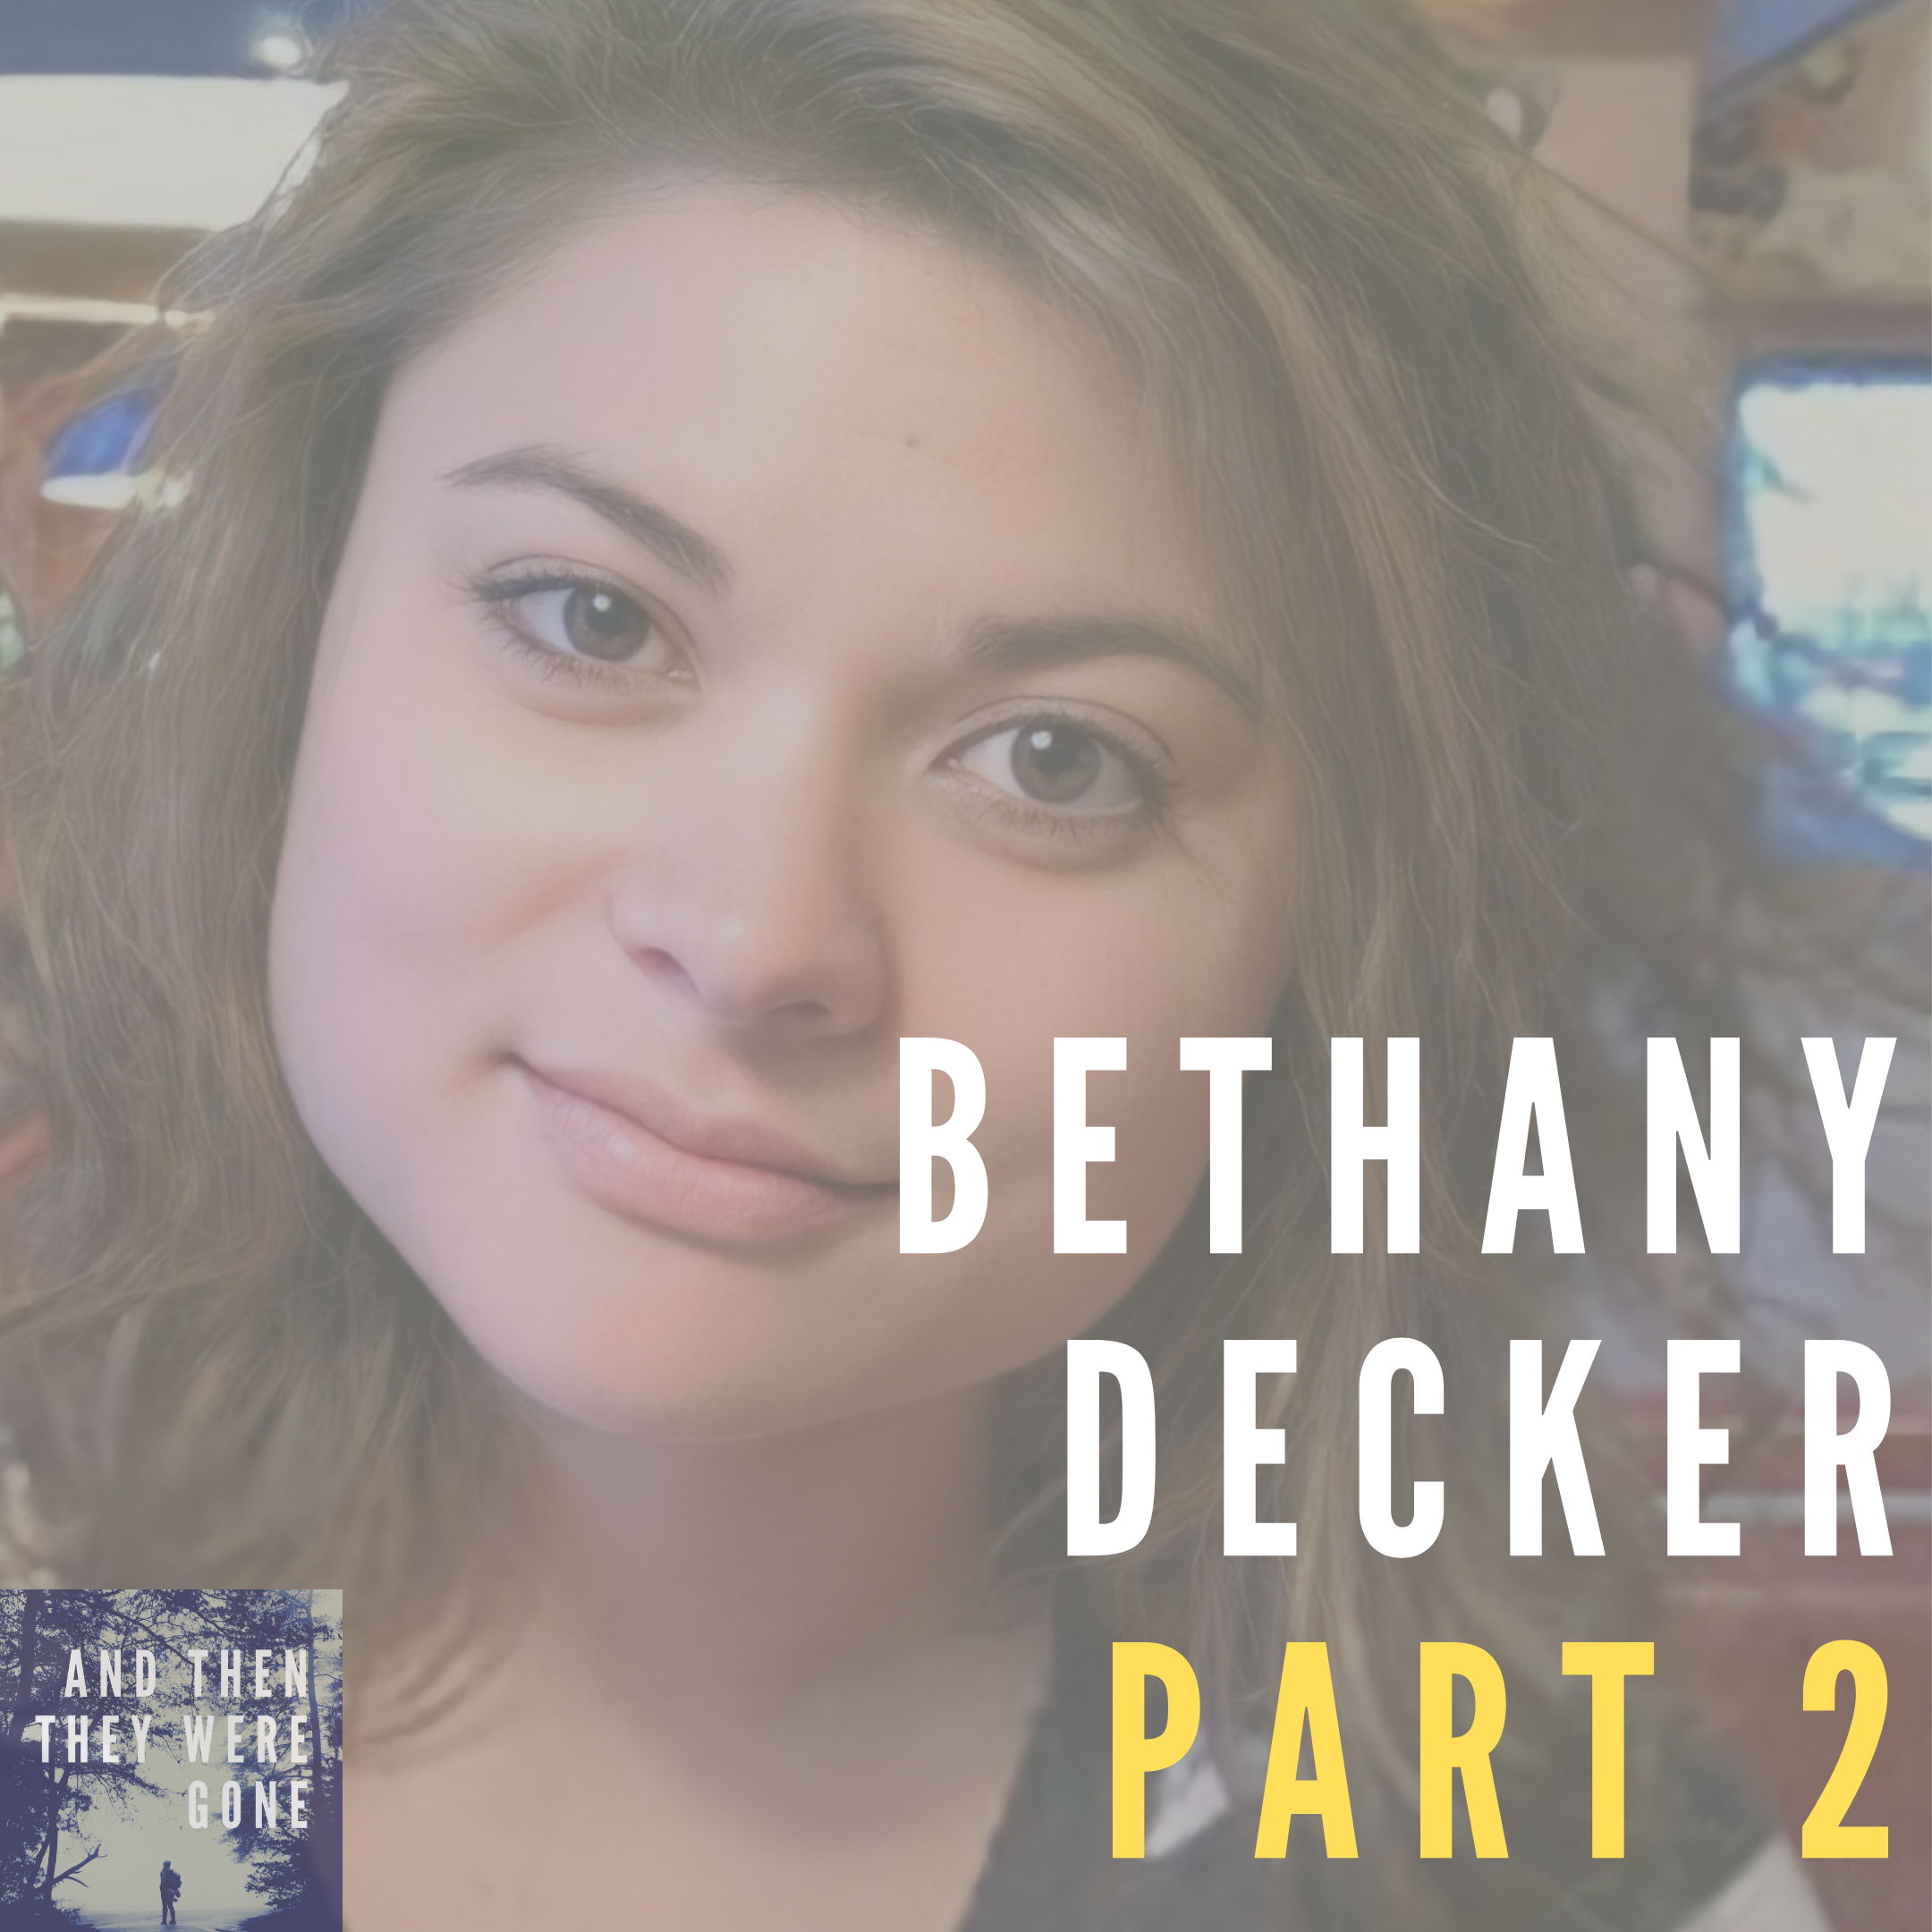 Bethany Decker: Missing since January 29, 2011